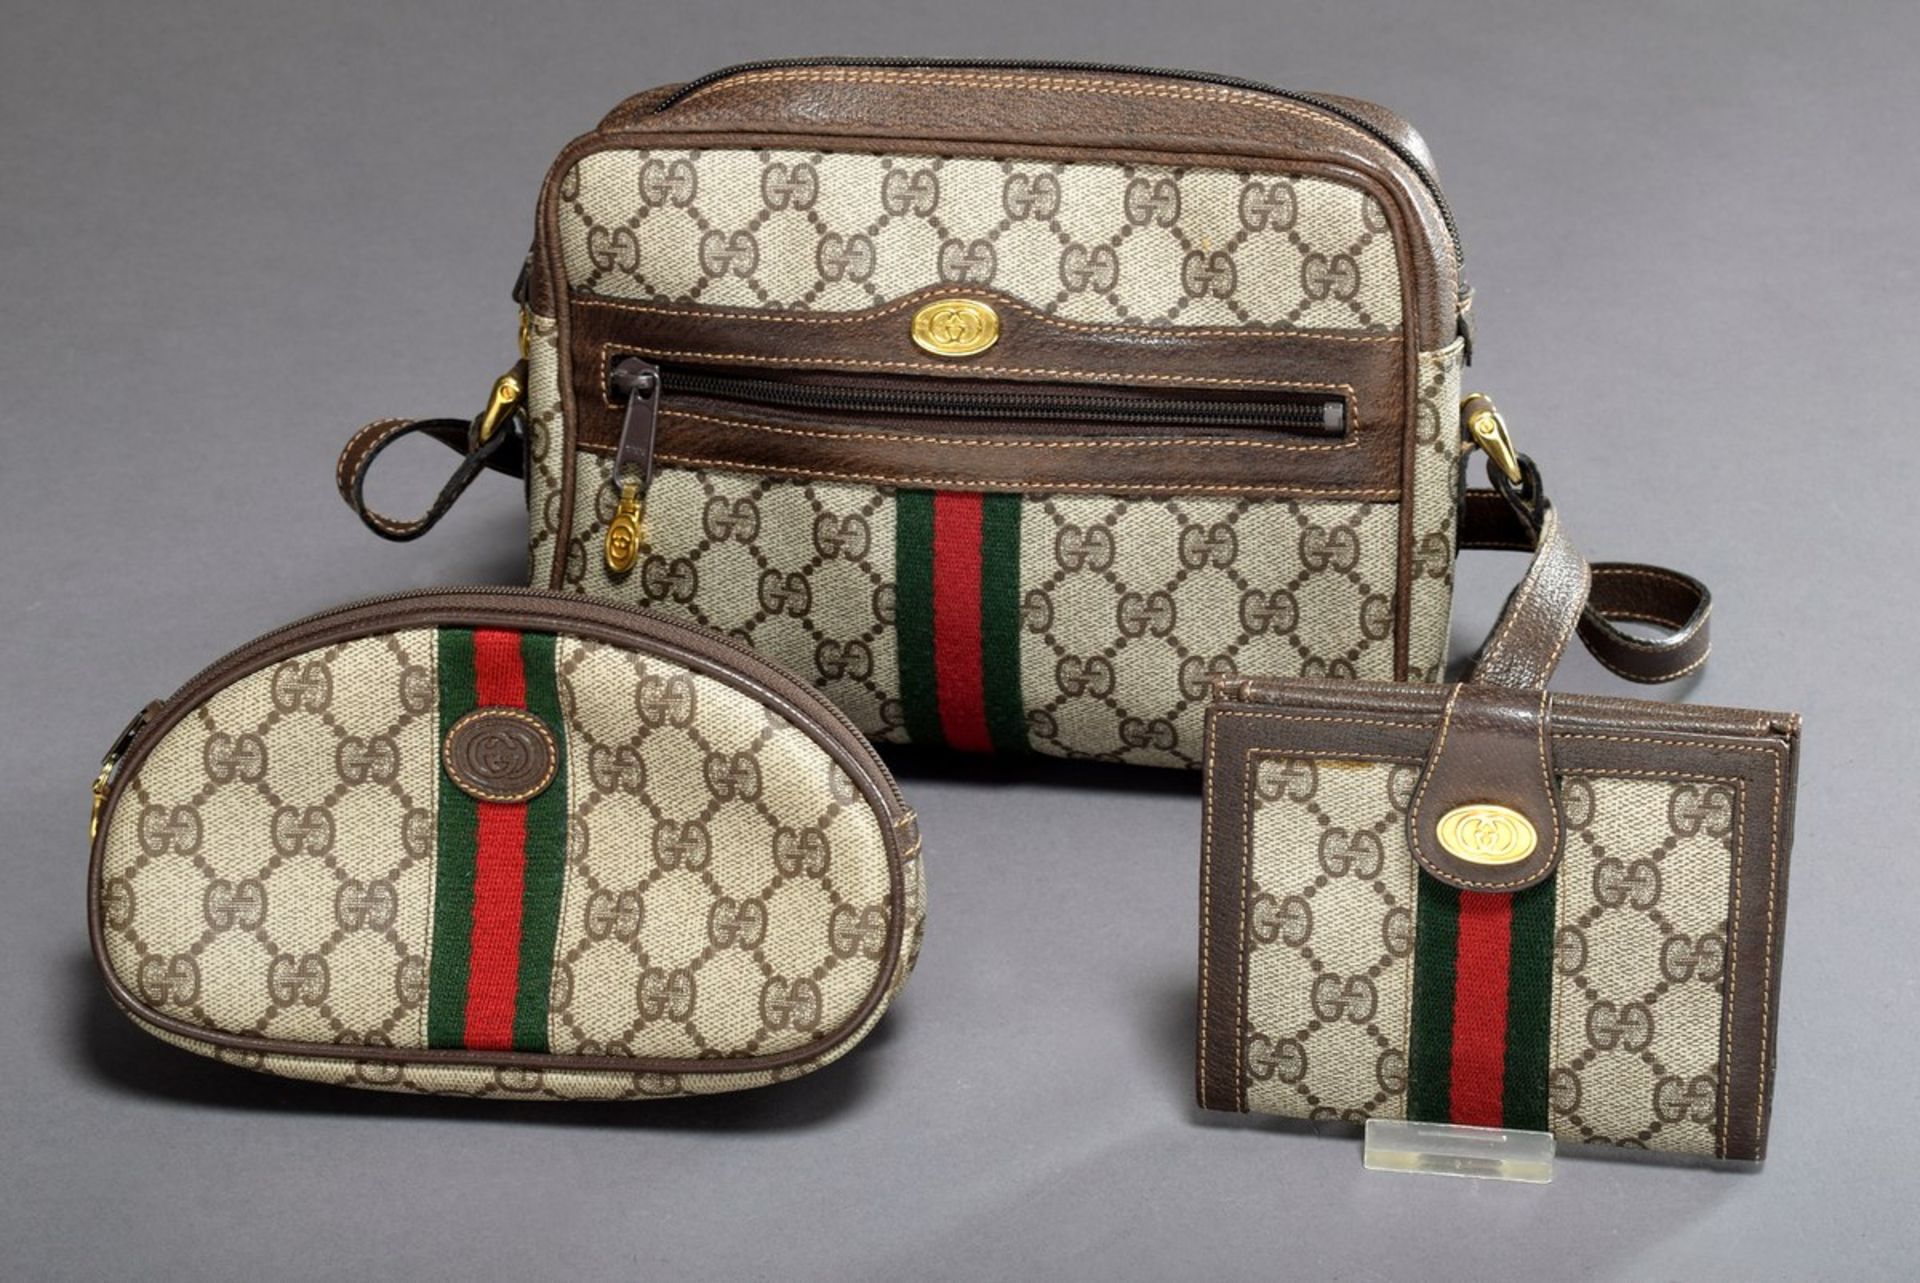 3 Various pieces Gucci "Ophedia" shoulder bag, cosmetic bag and wallet, canvas beige with brown lea